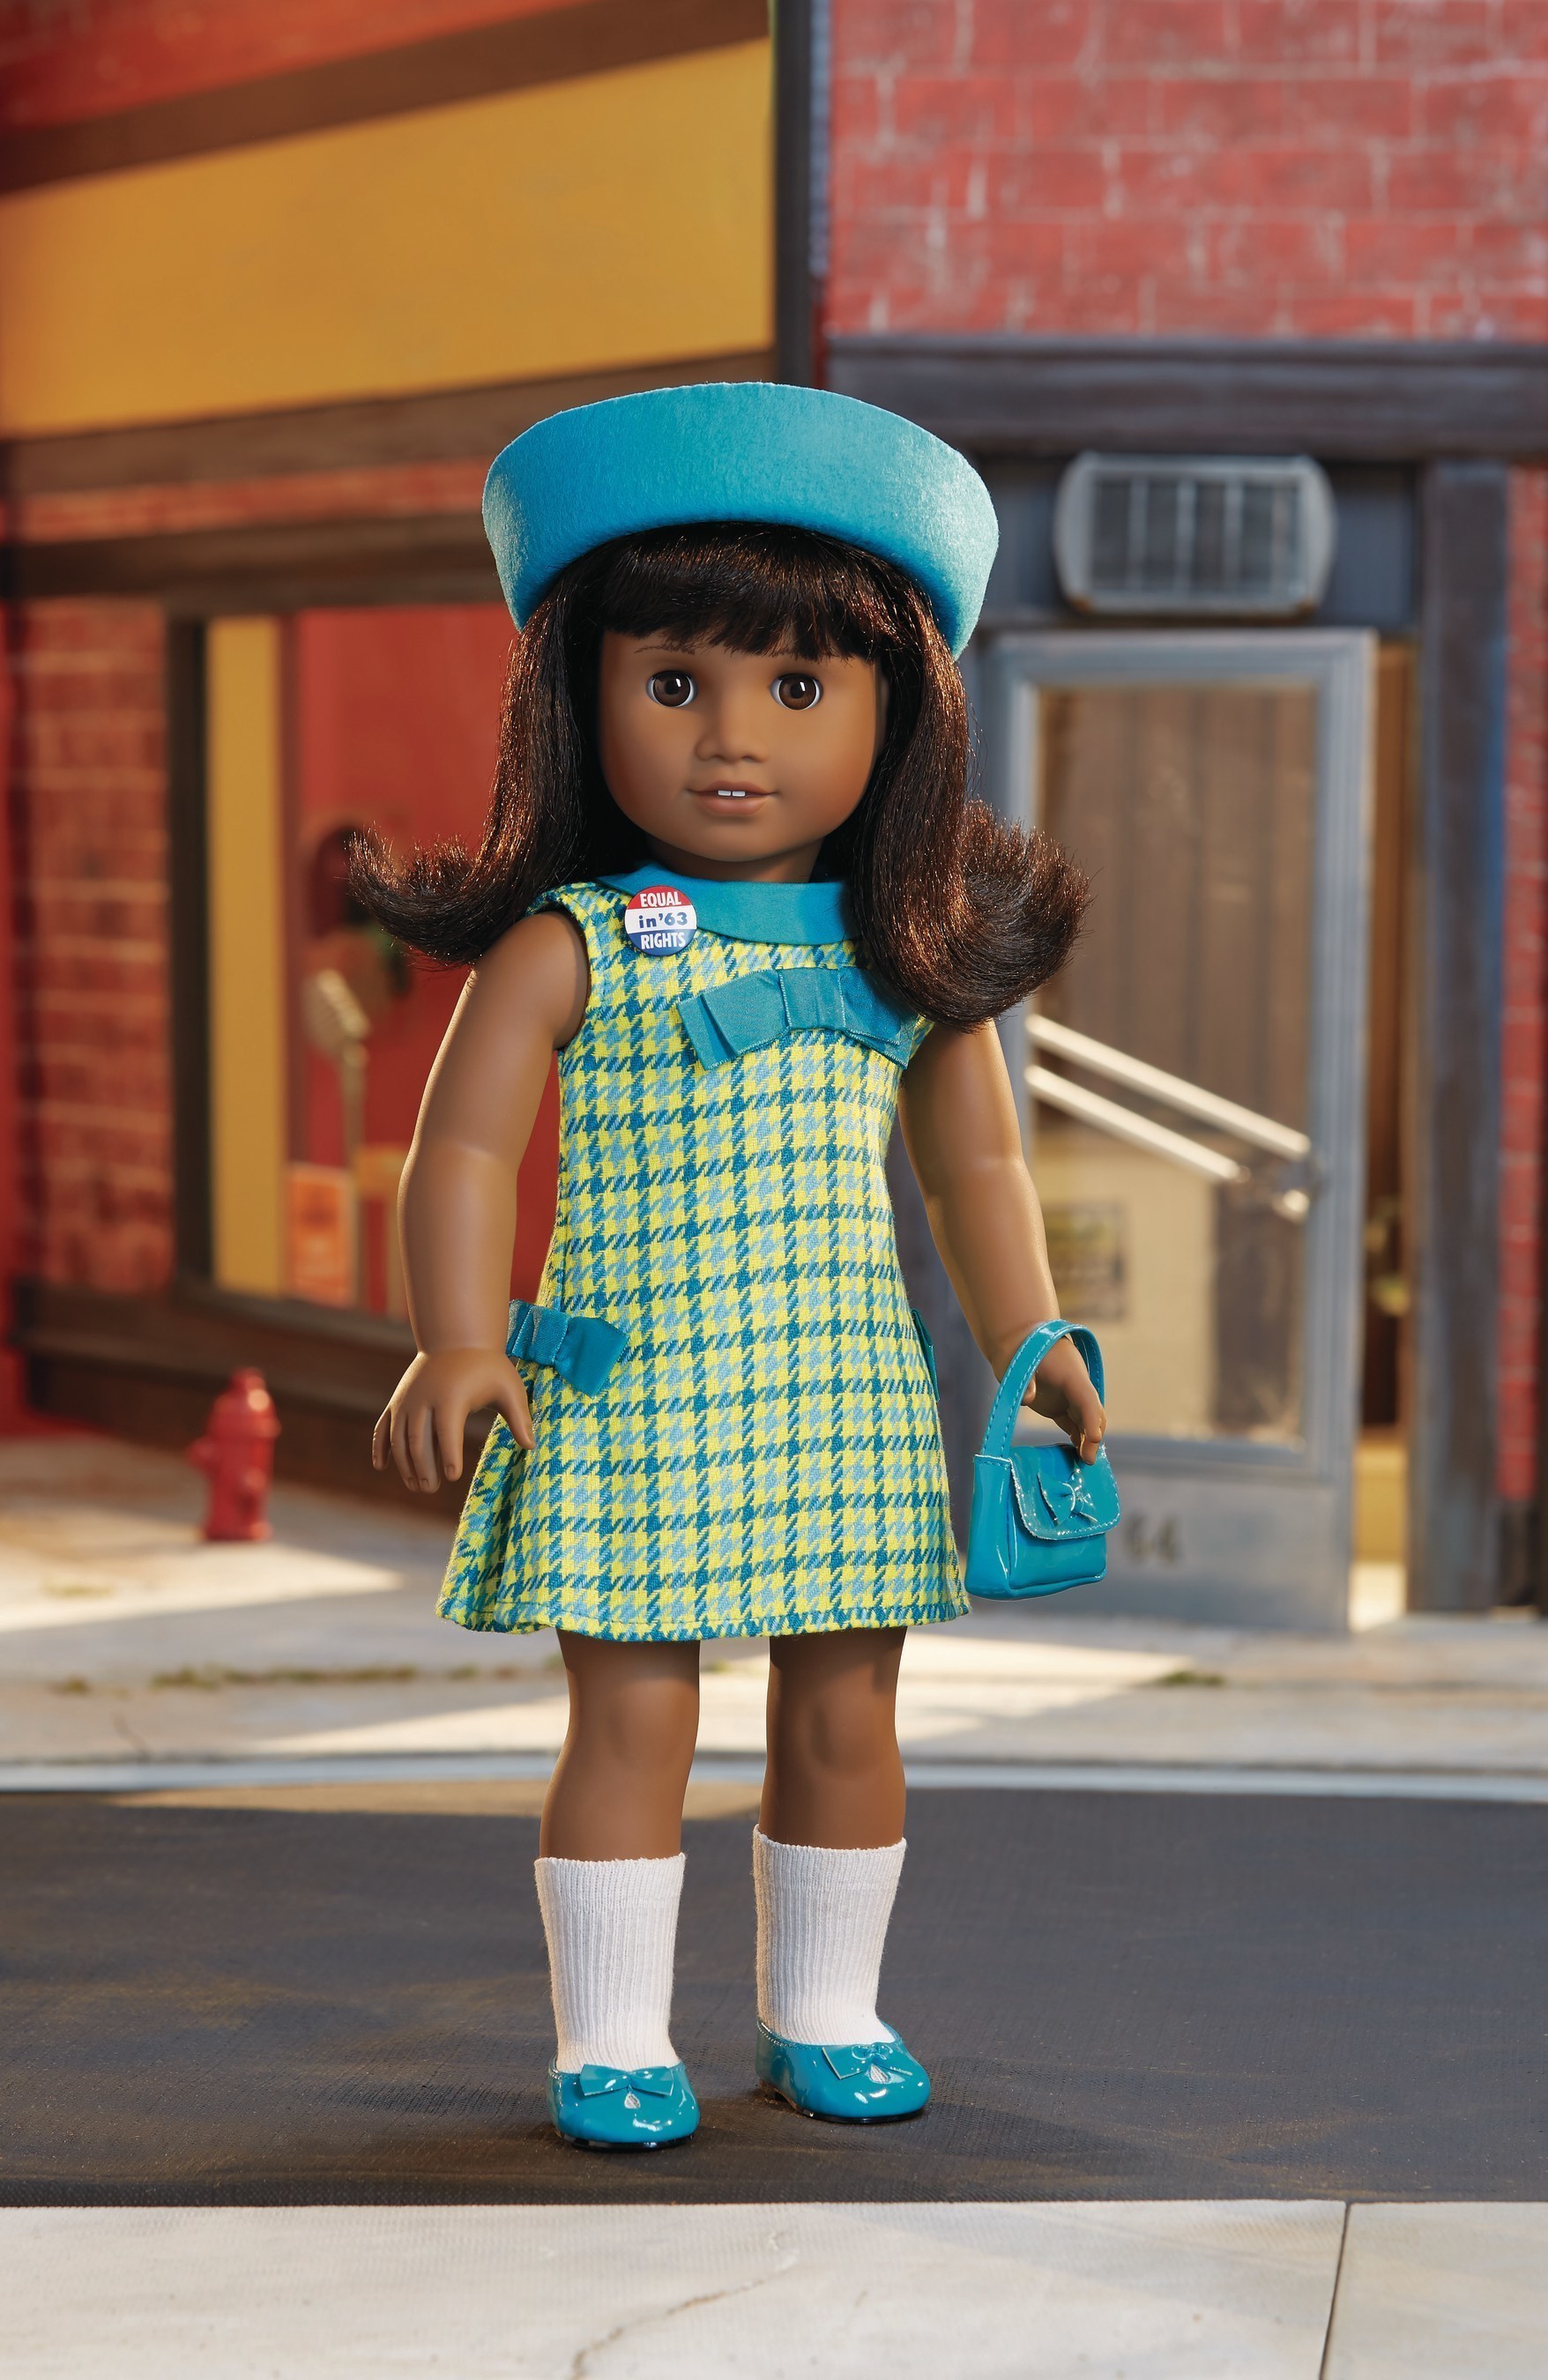 American Girl's newest BeForever character, Melody Ellison.